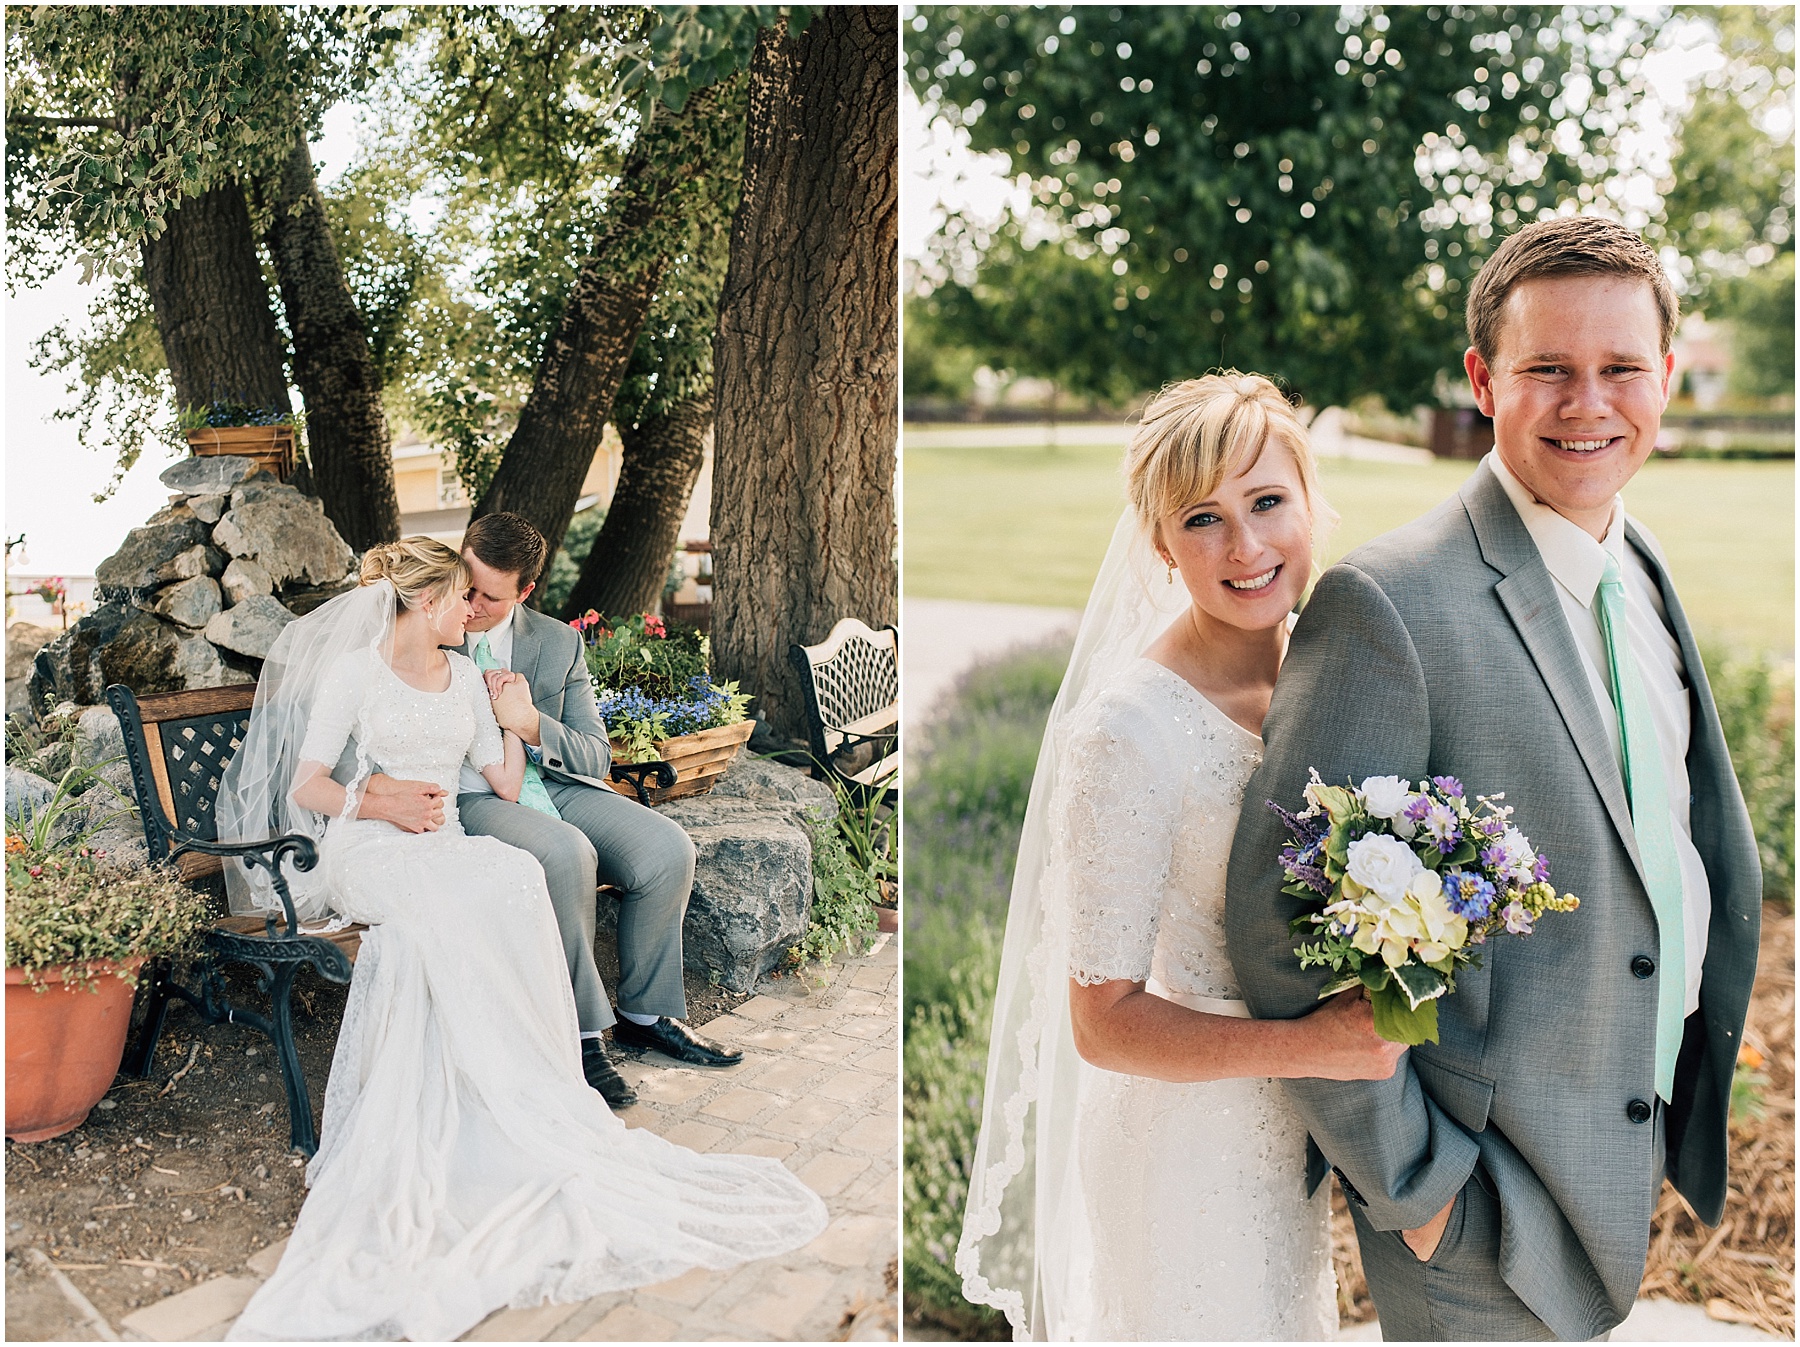 Kailey and Jacob Bridals | Mona Lavender Fields - Kylee Ann Photography ...